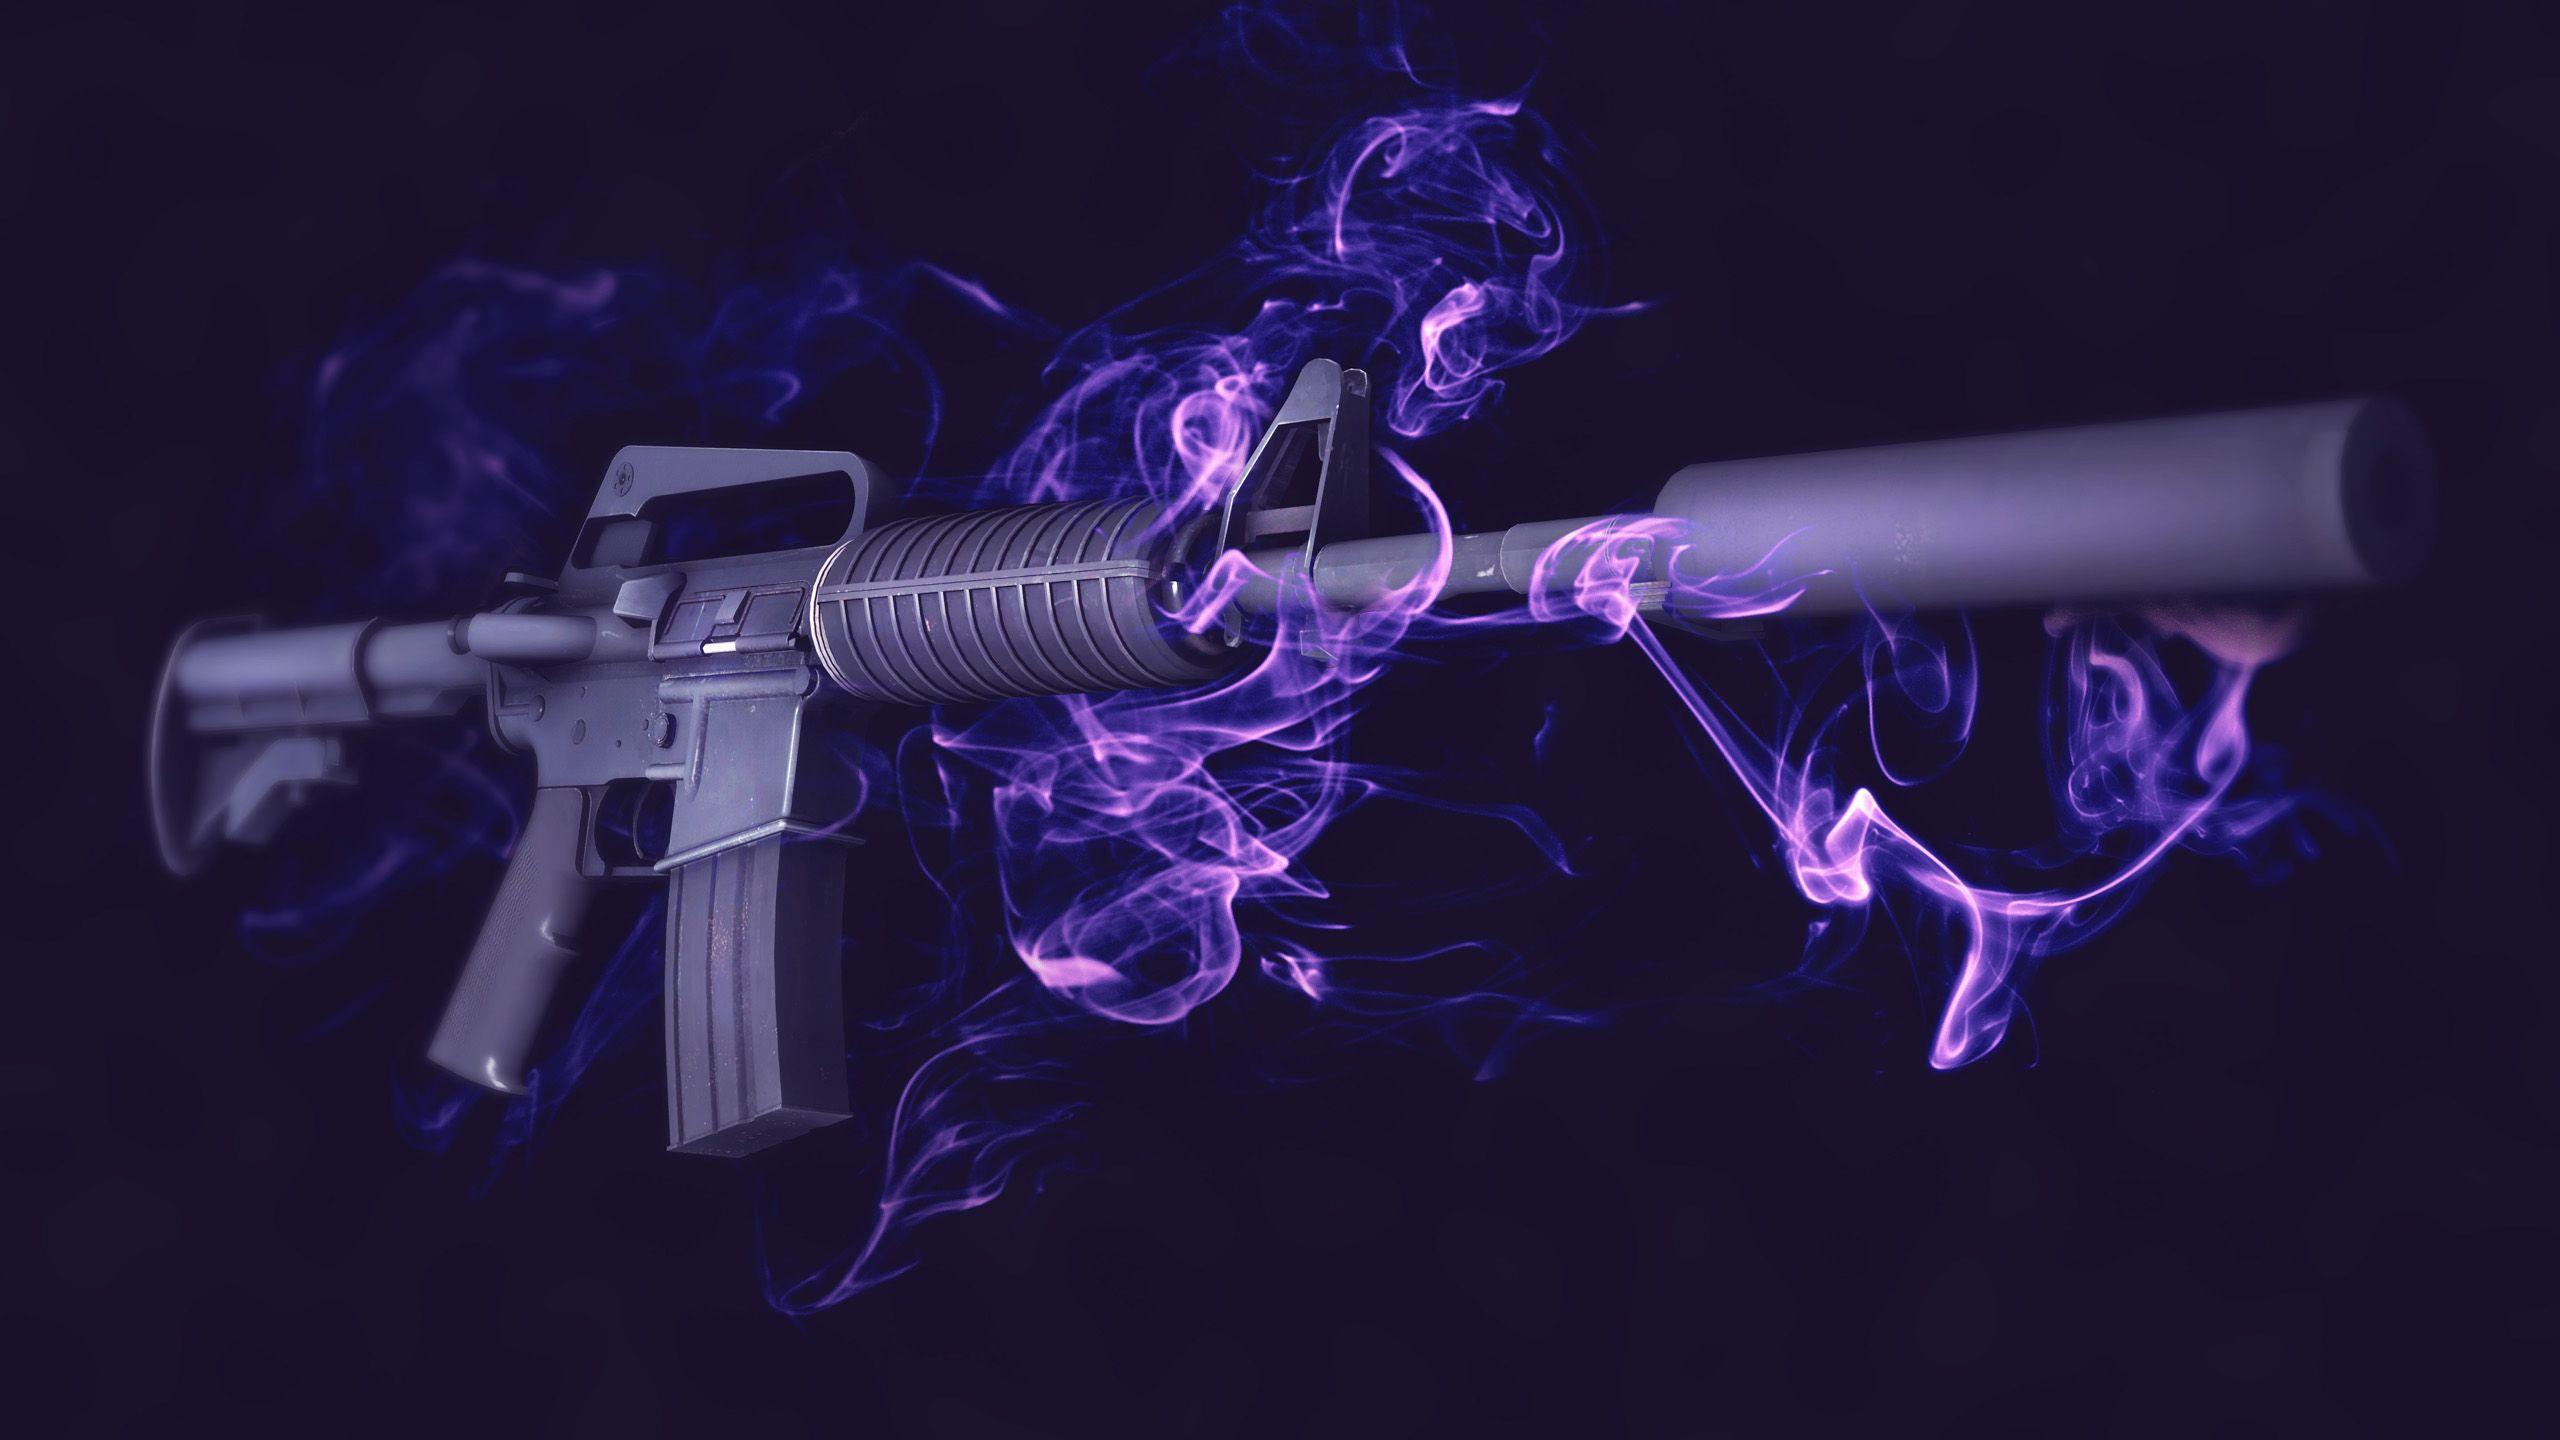 M4A1 S Purple Fire. CS:GO Wallpaper And Background